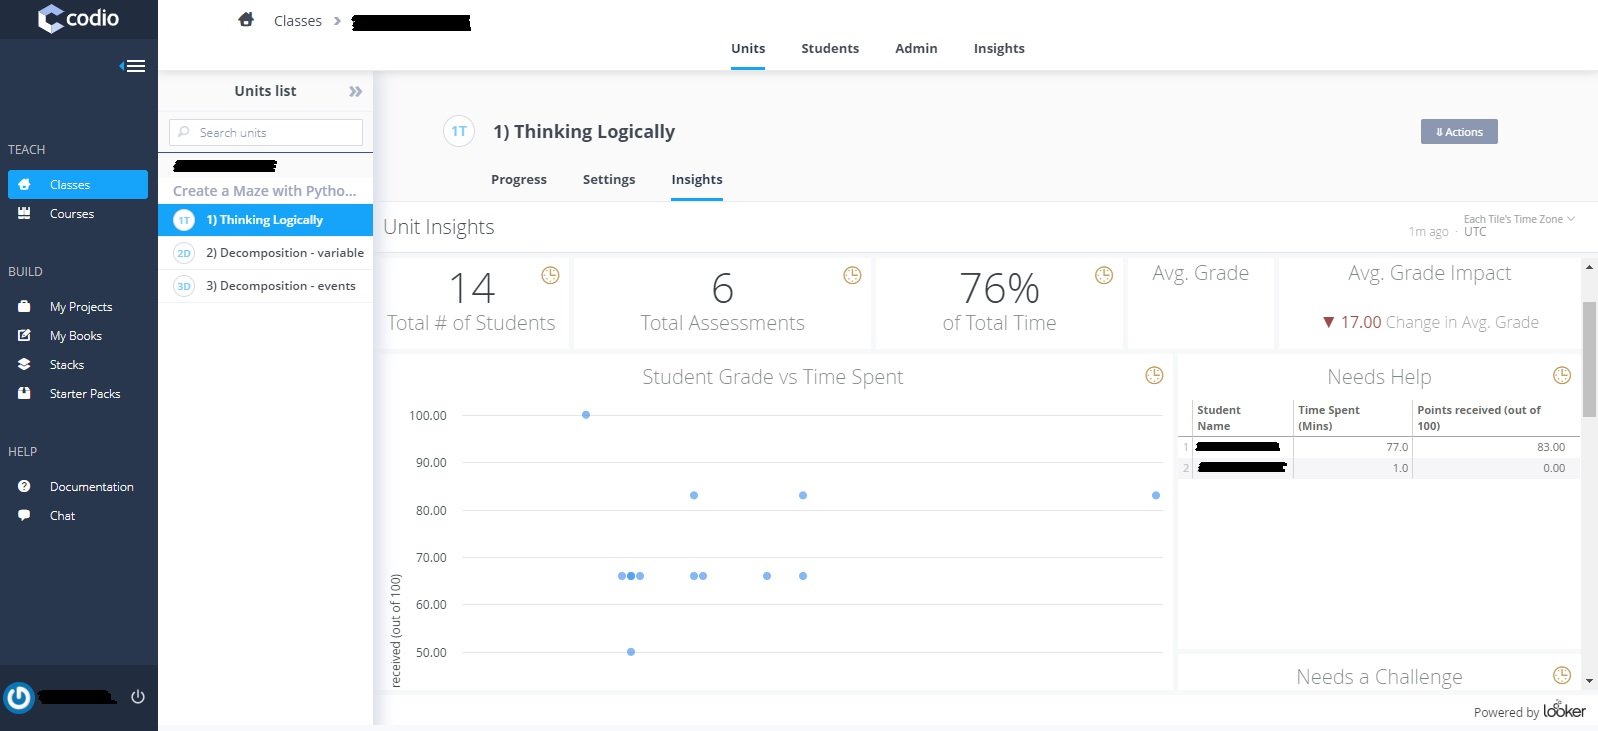 Advanced Student Learning Insights in Codio